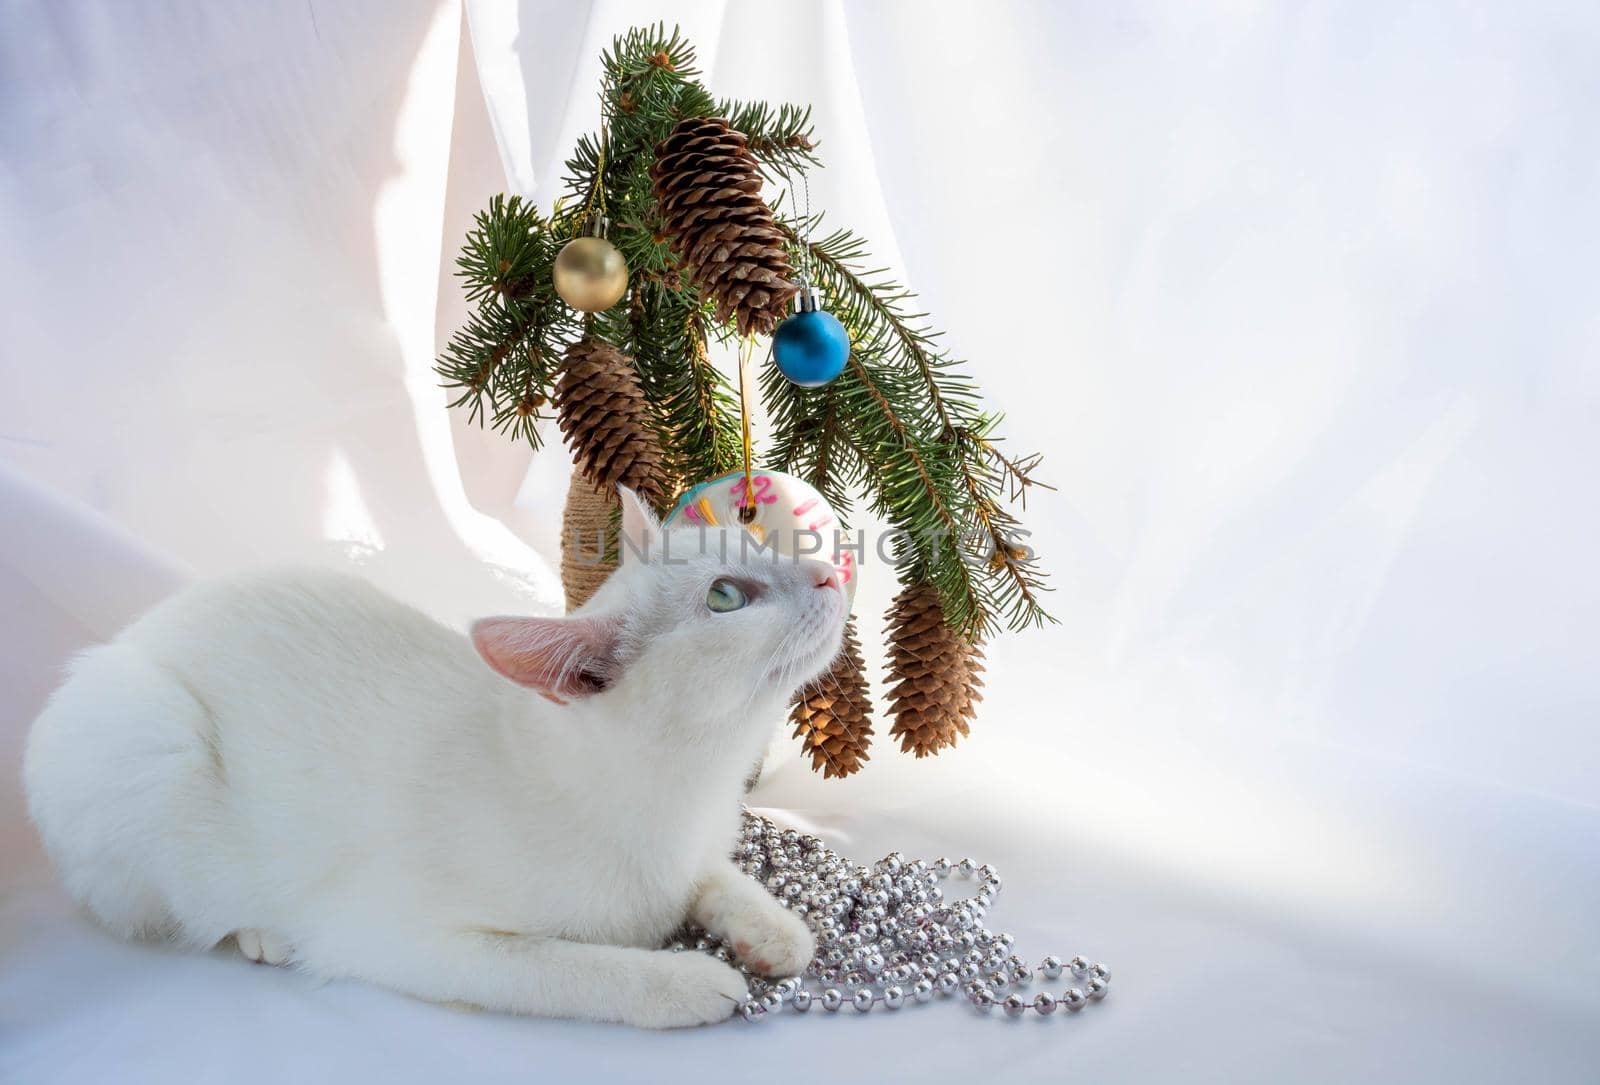 New Year's Eve, 2022.A white curious cat sits next to a Christmas tree bouquet.